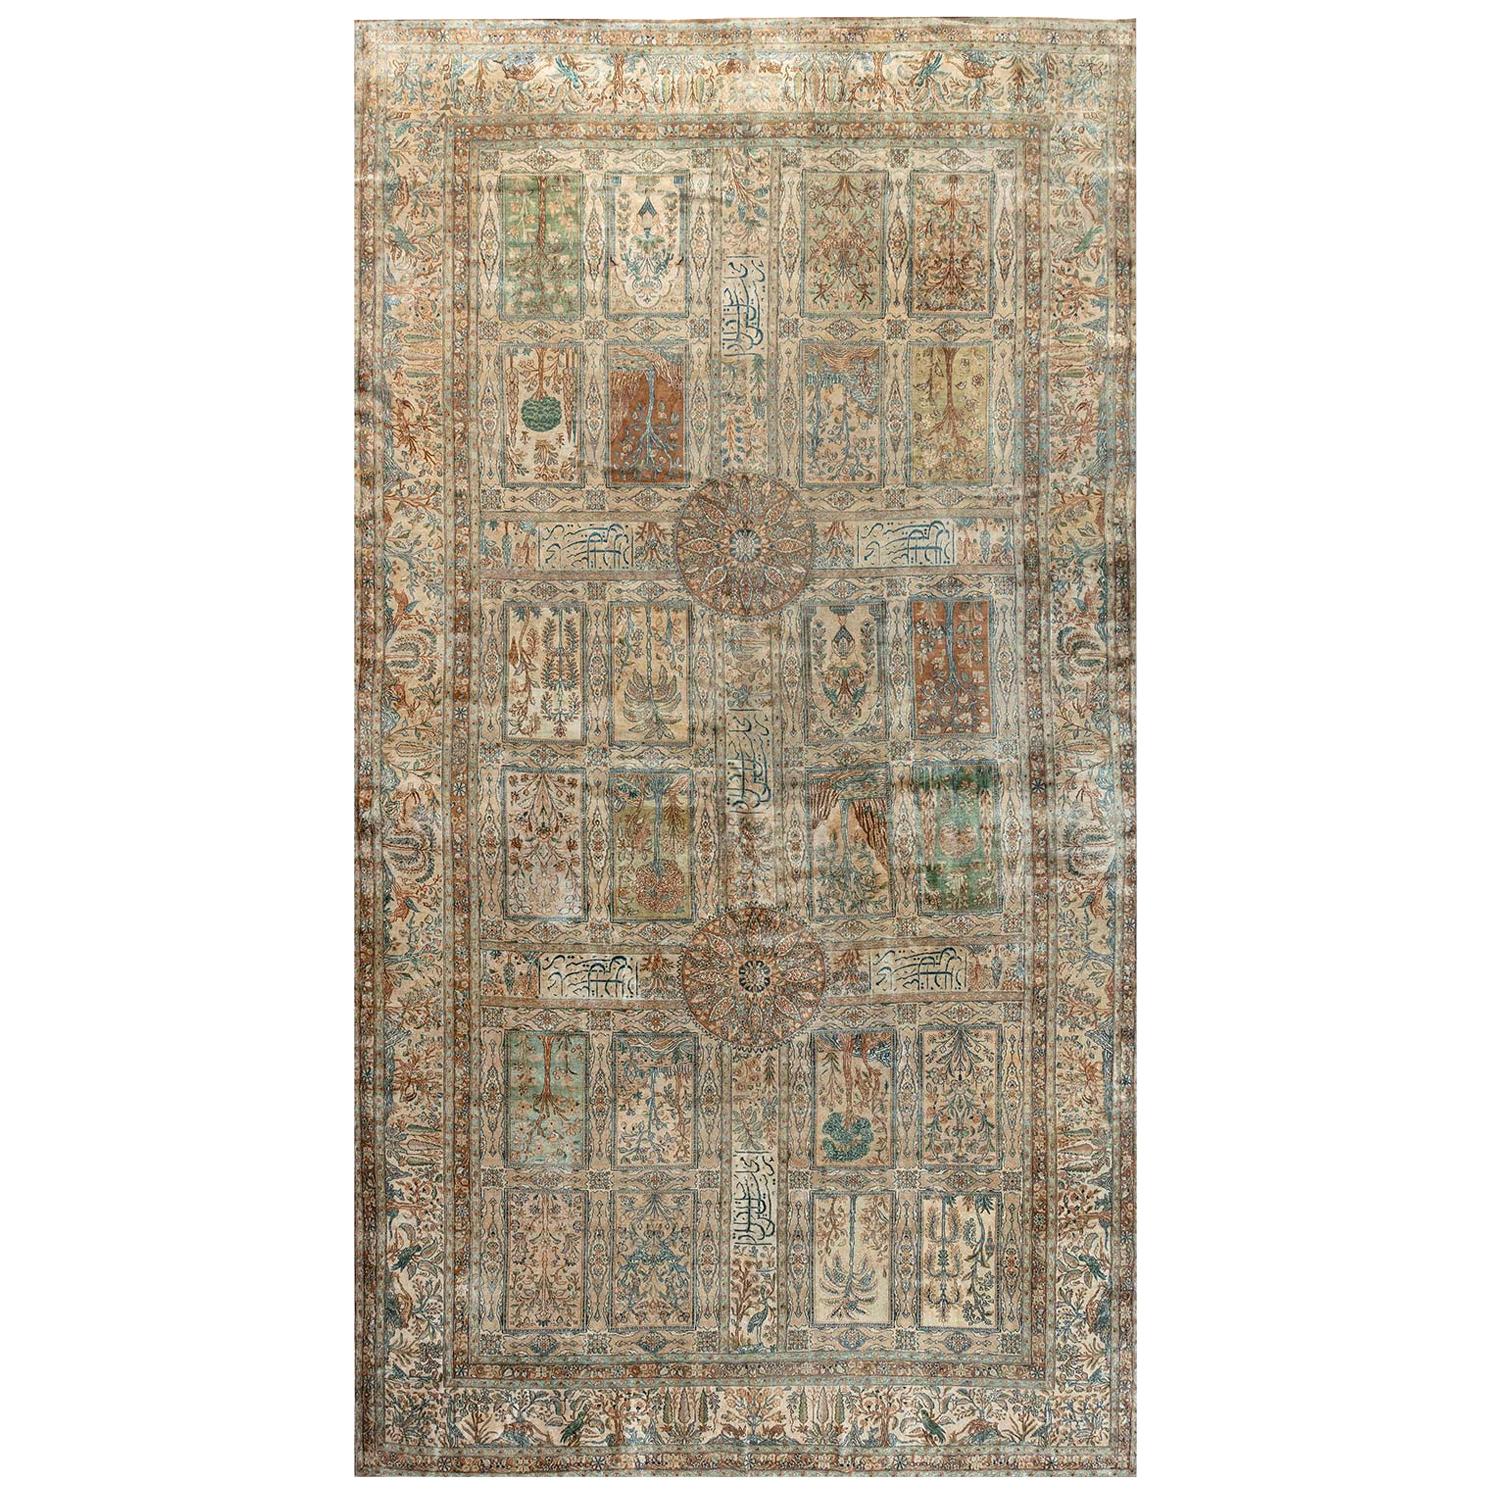 Authentic Early 20th Century Persian Kirman Rug